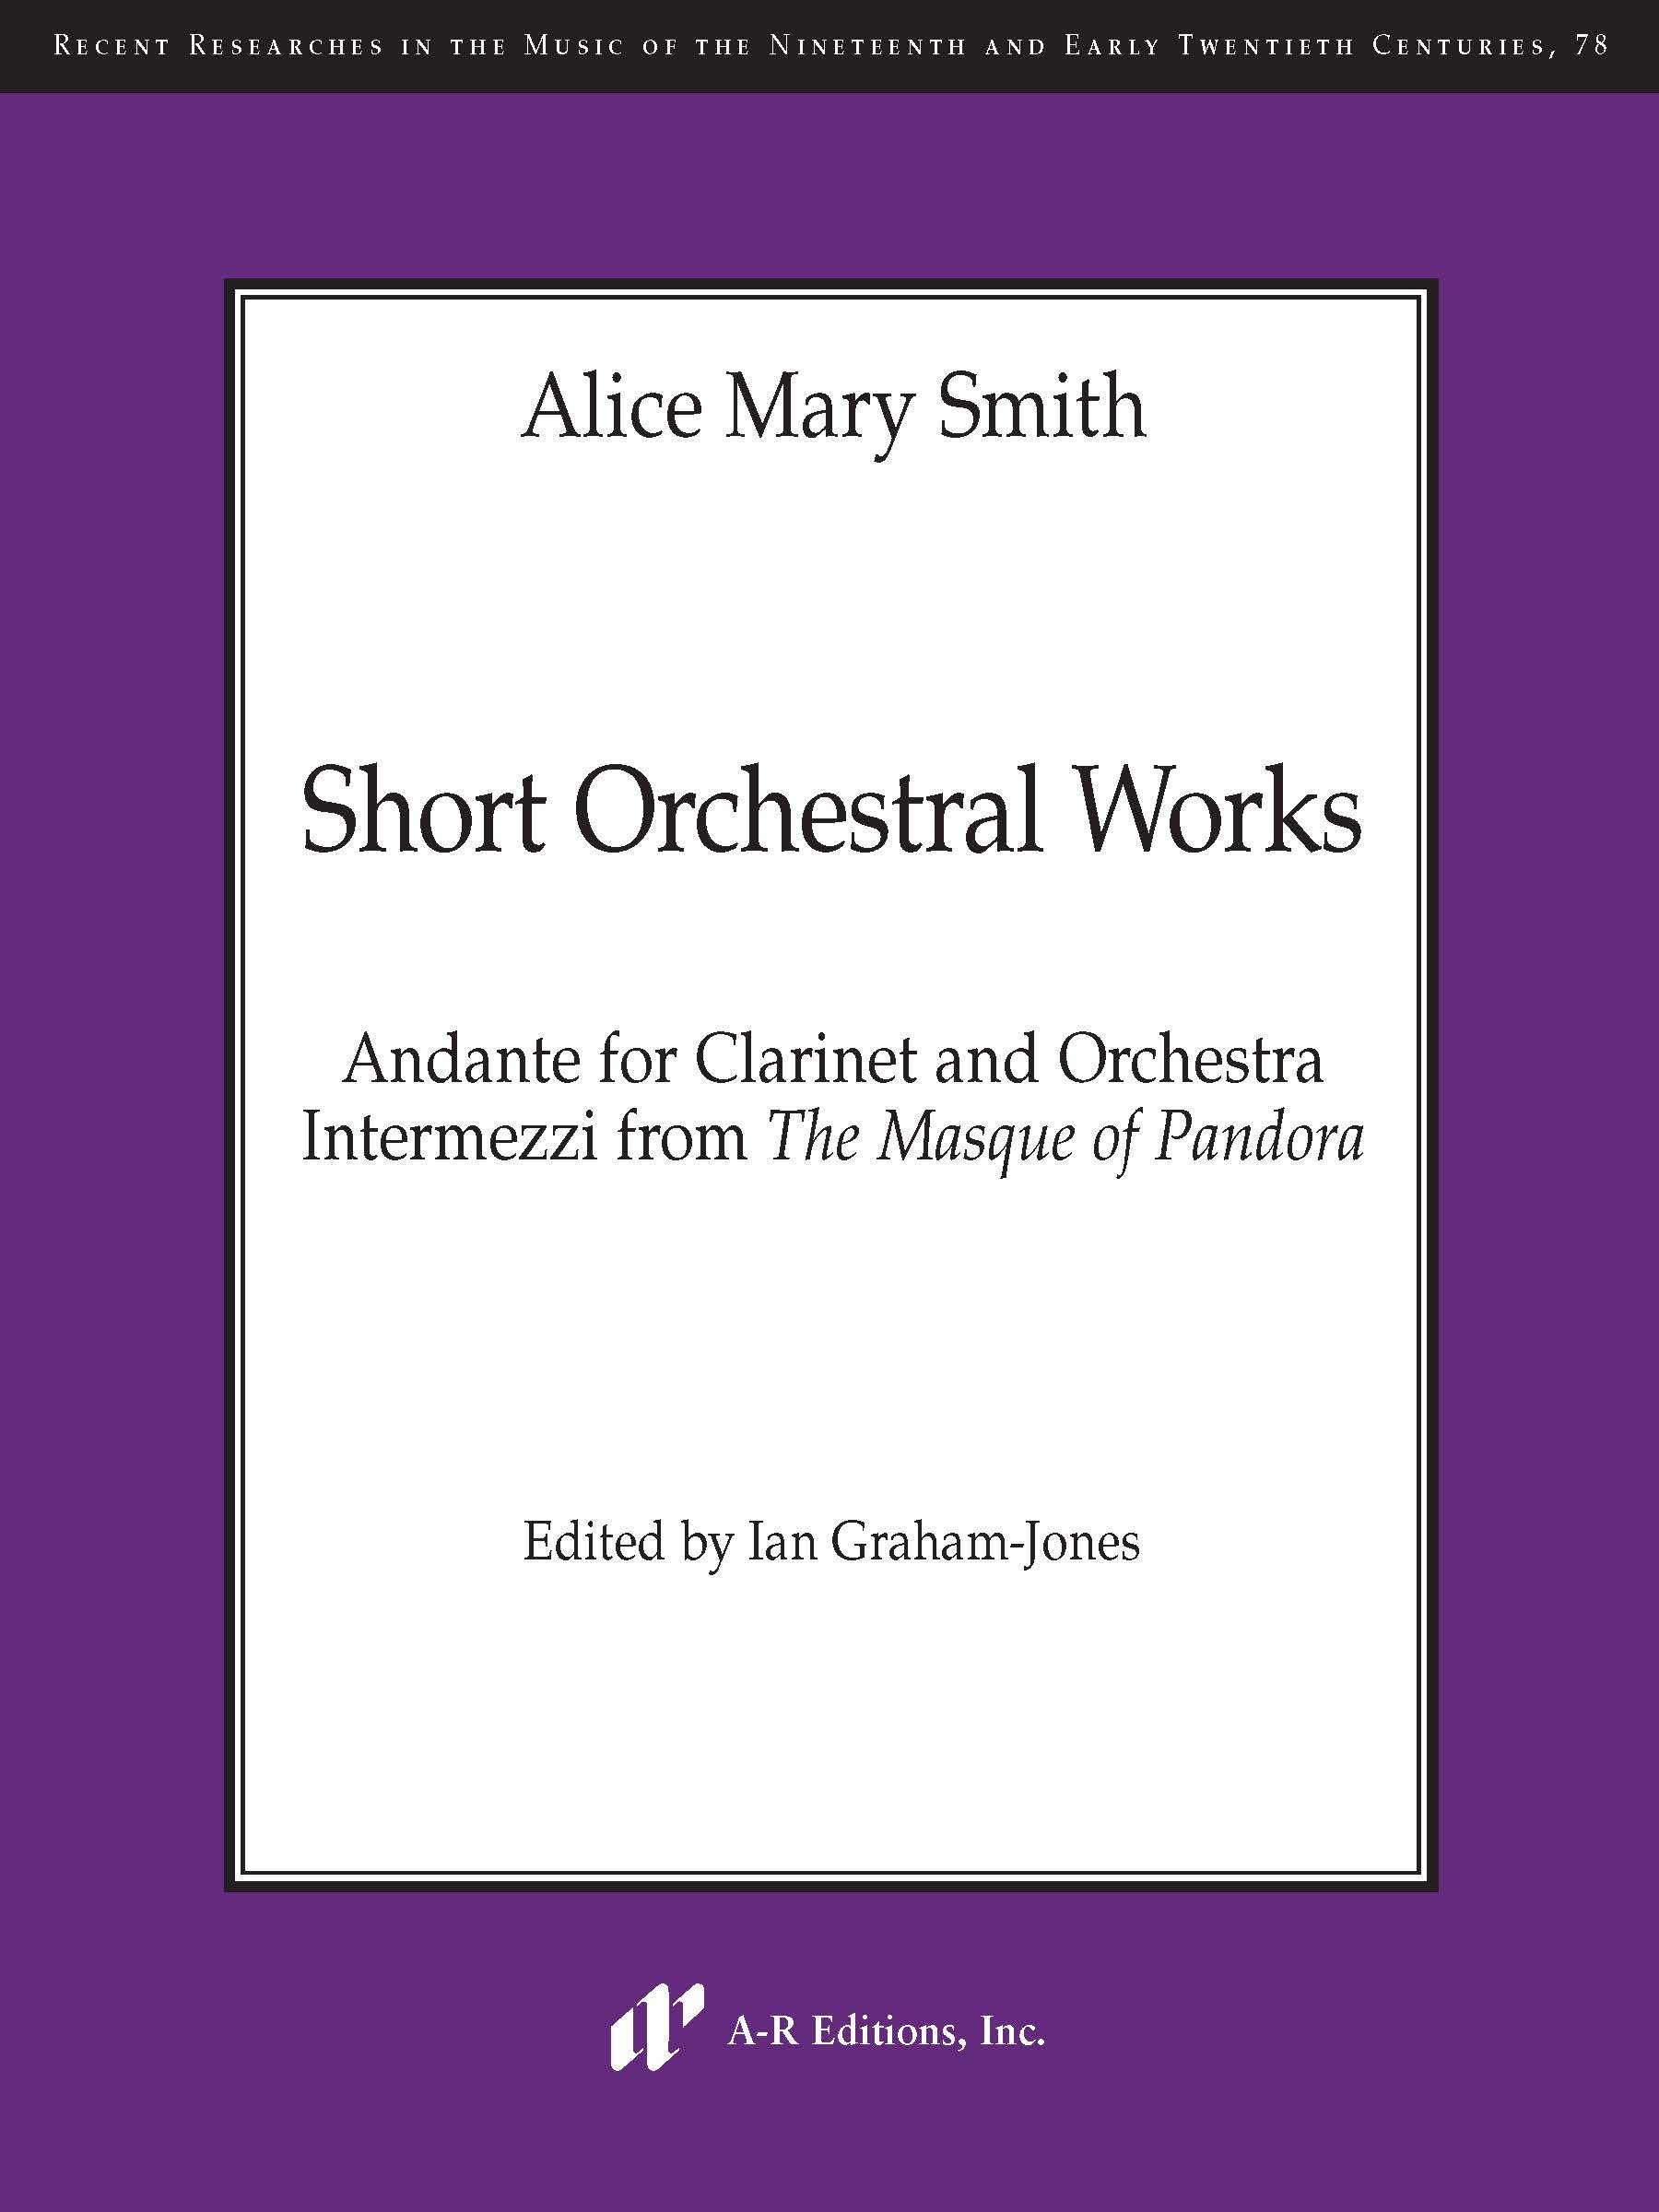 Alice Mary Smith Short Orchestral Works RRMNETC78